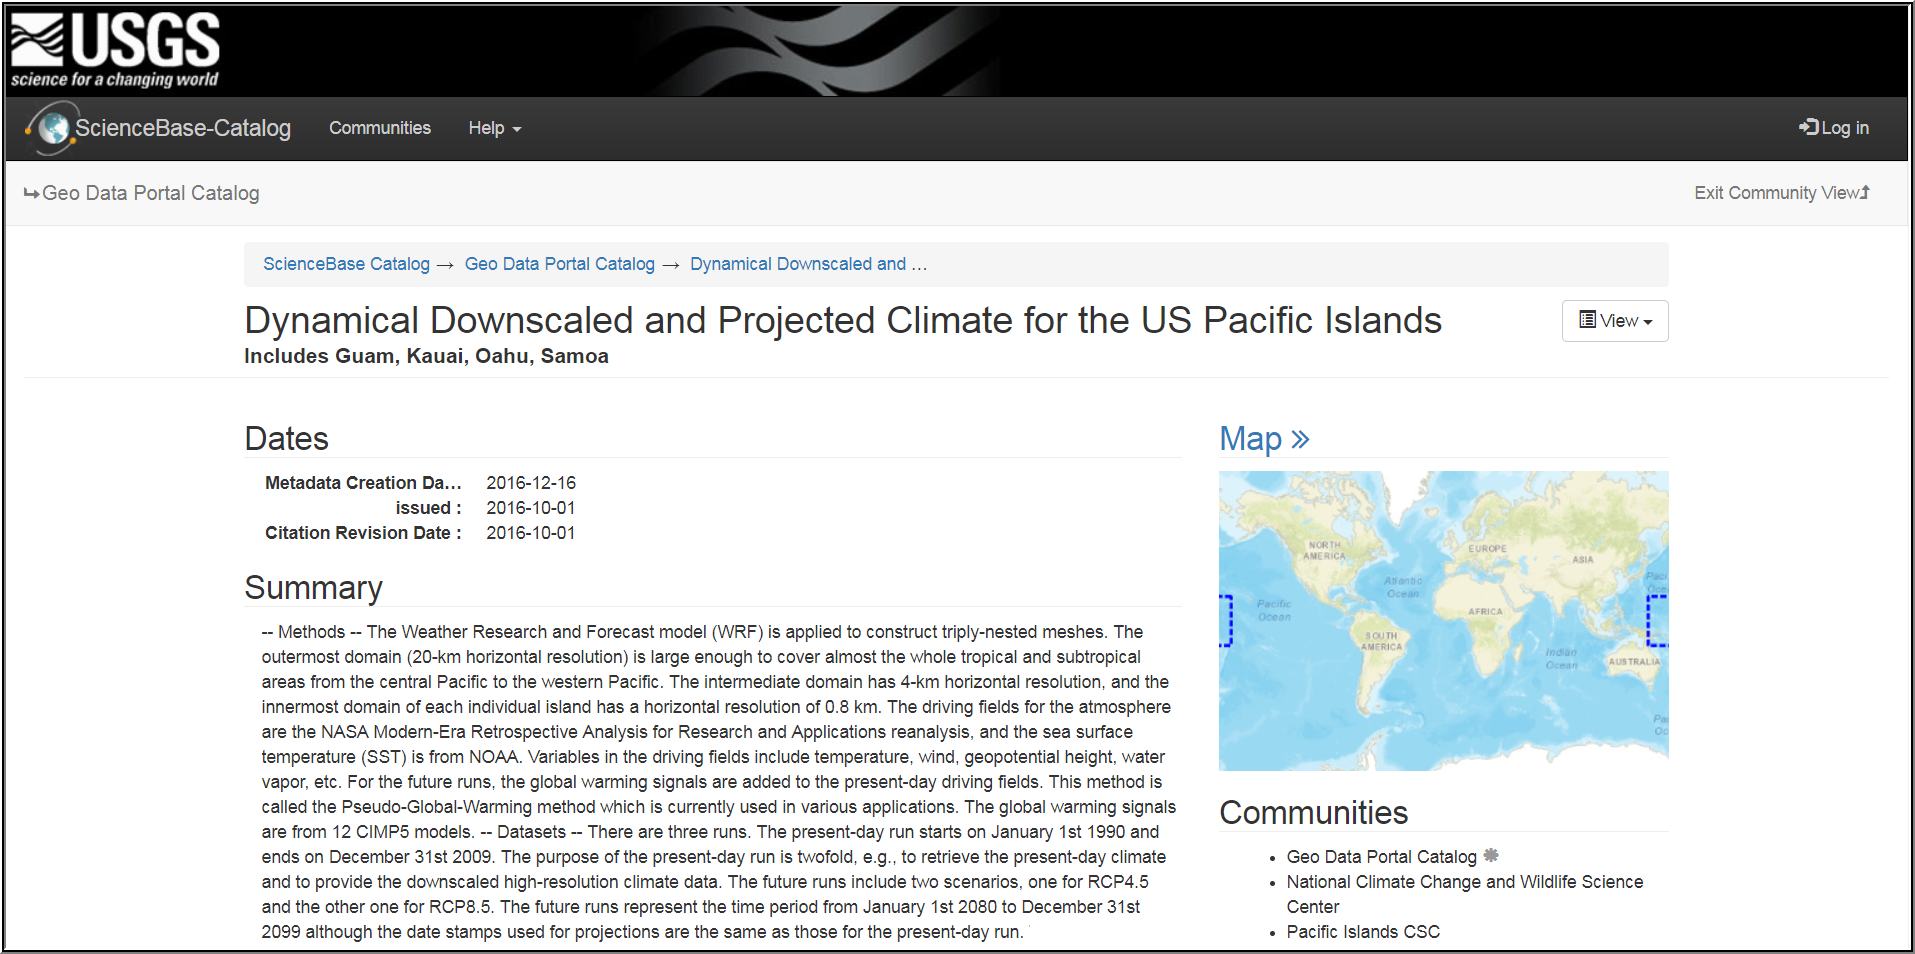 Dynamical Downscaled and Projected Climate for the US Pacific Islands